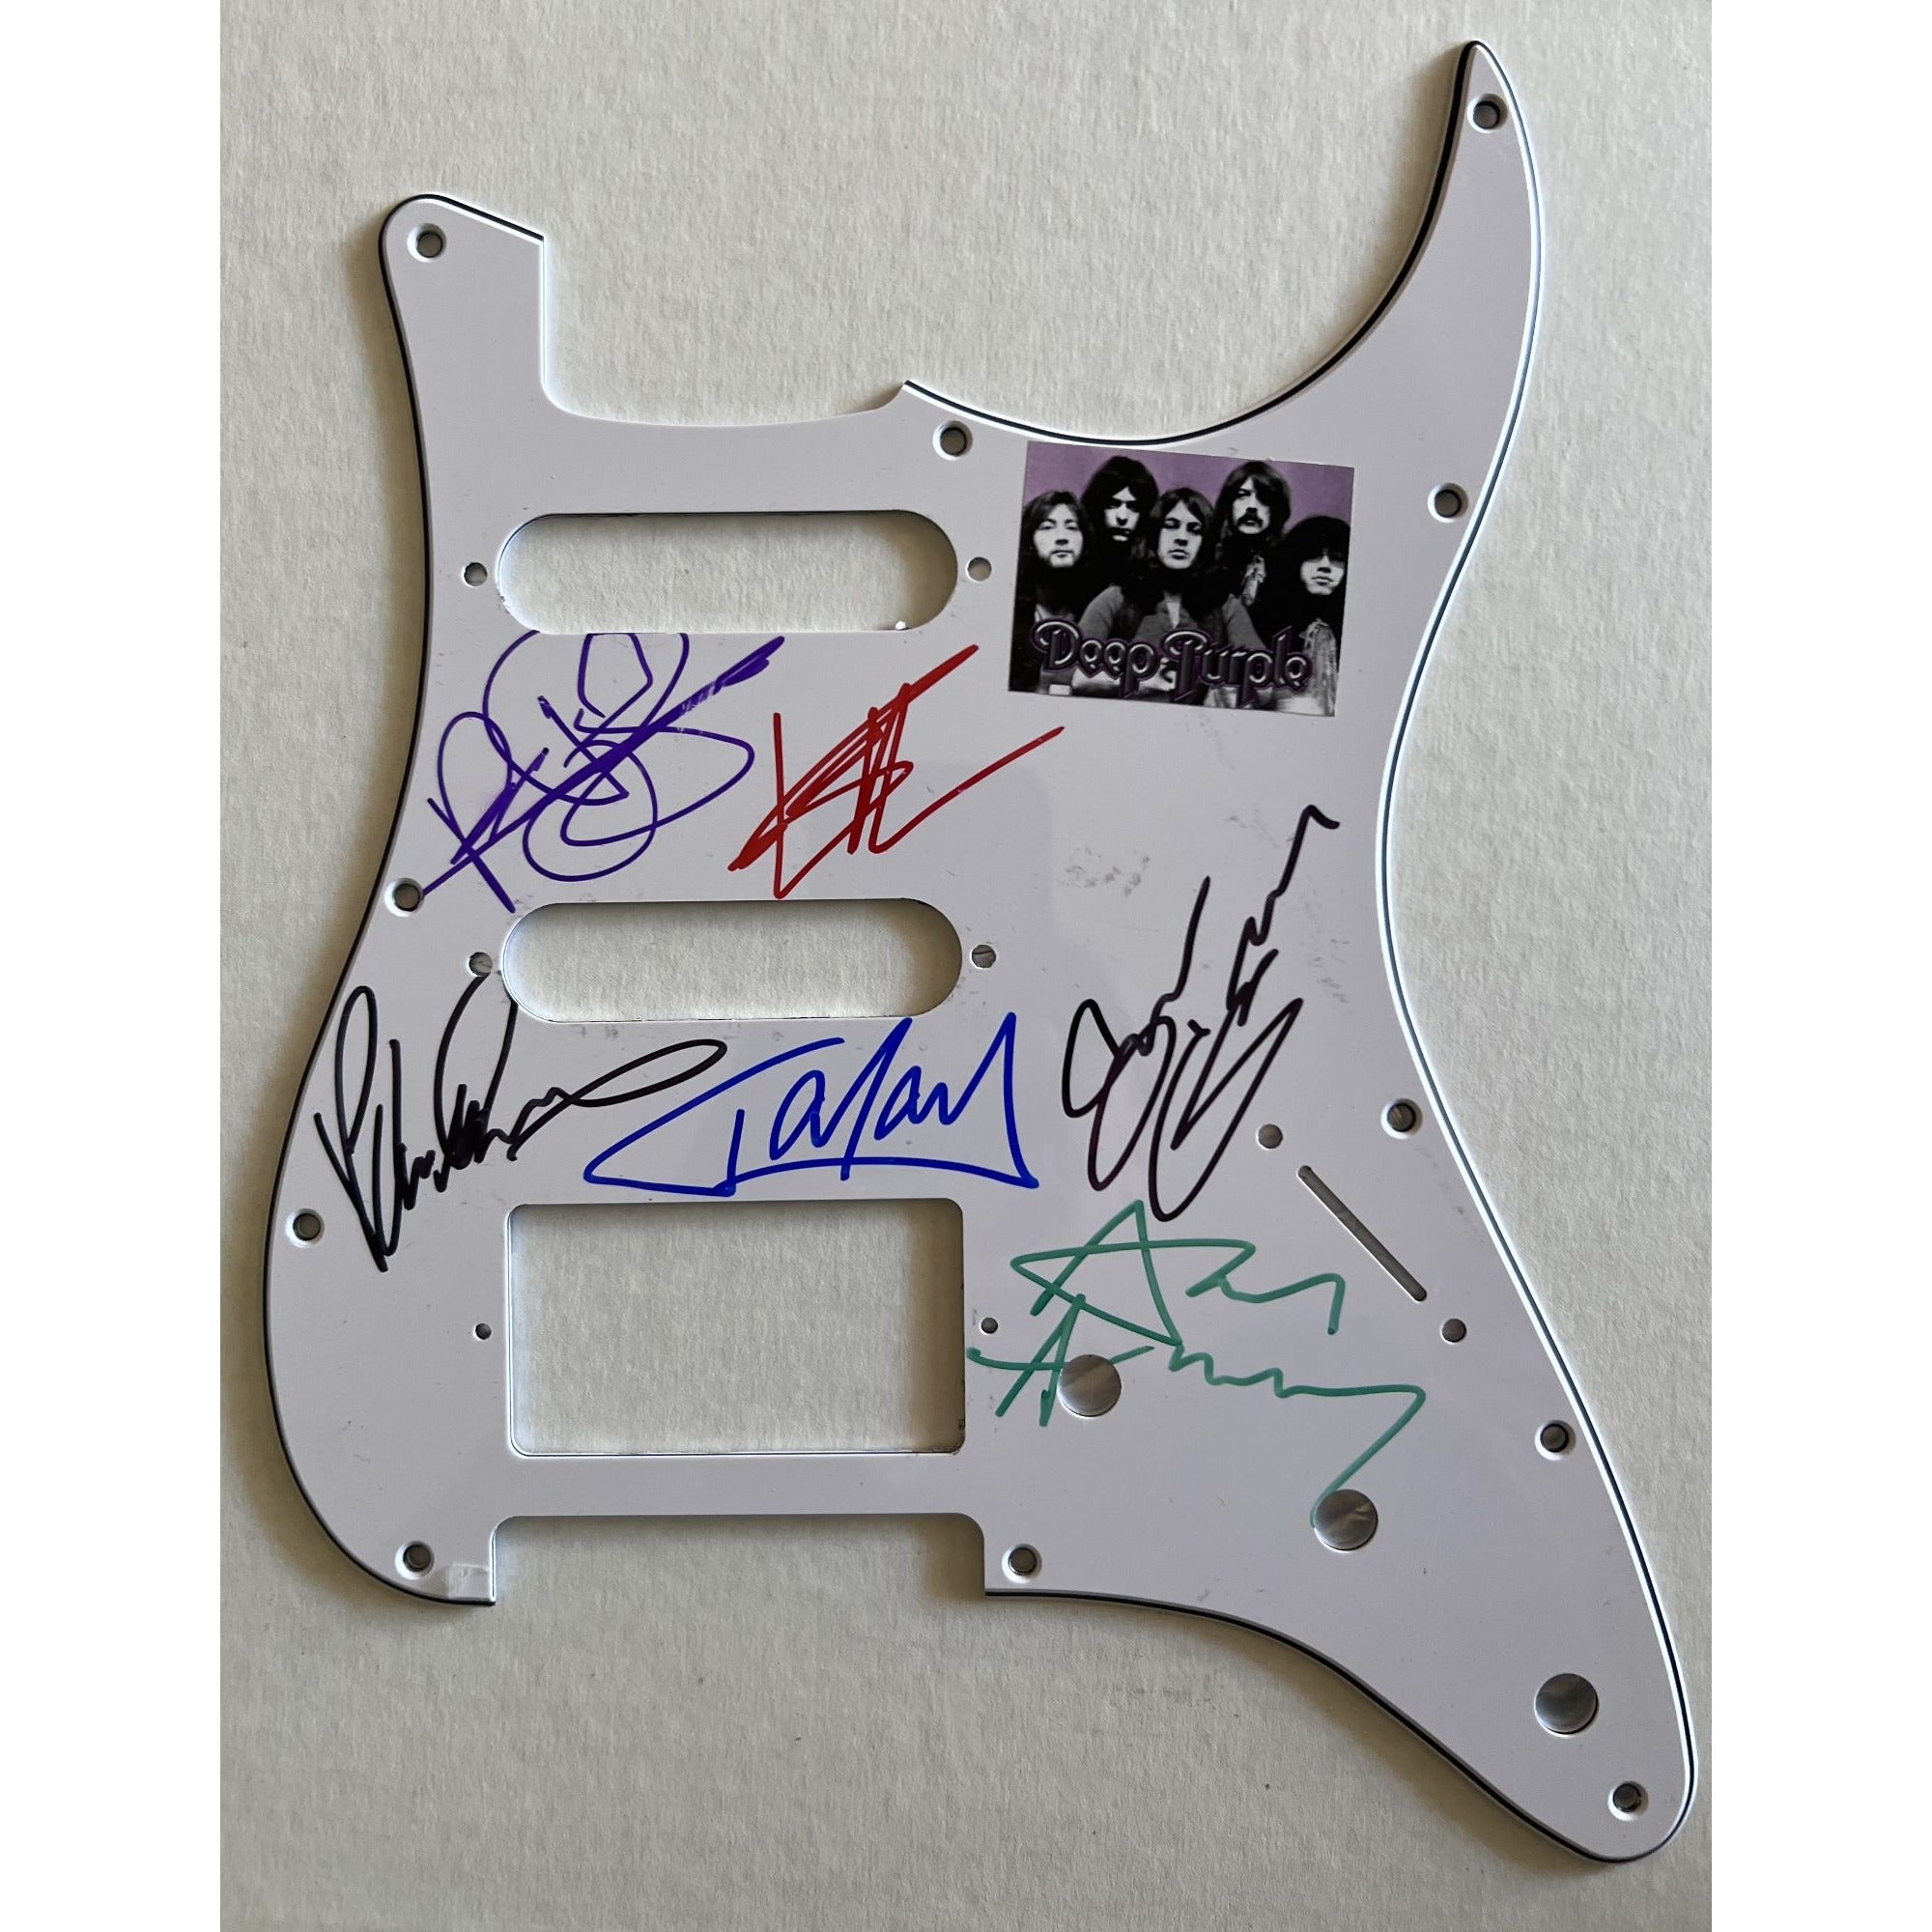 Deep Purple  Ian Paice Roger Glover Ian Gillan Don Airey  Stratocaster electric pickguard signed with proof